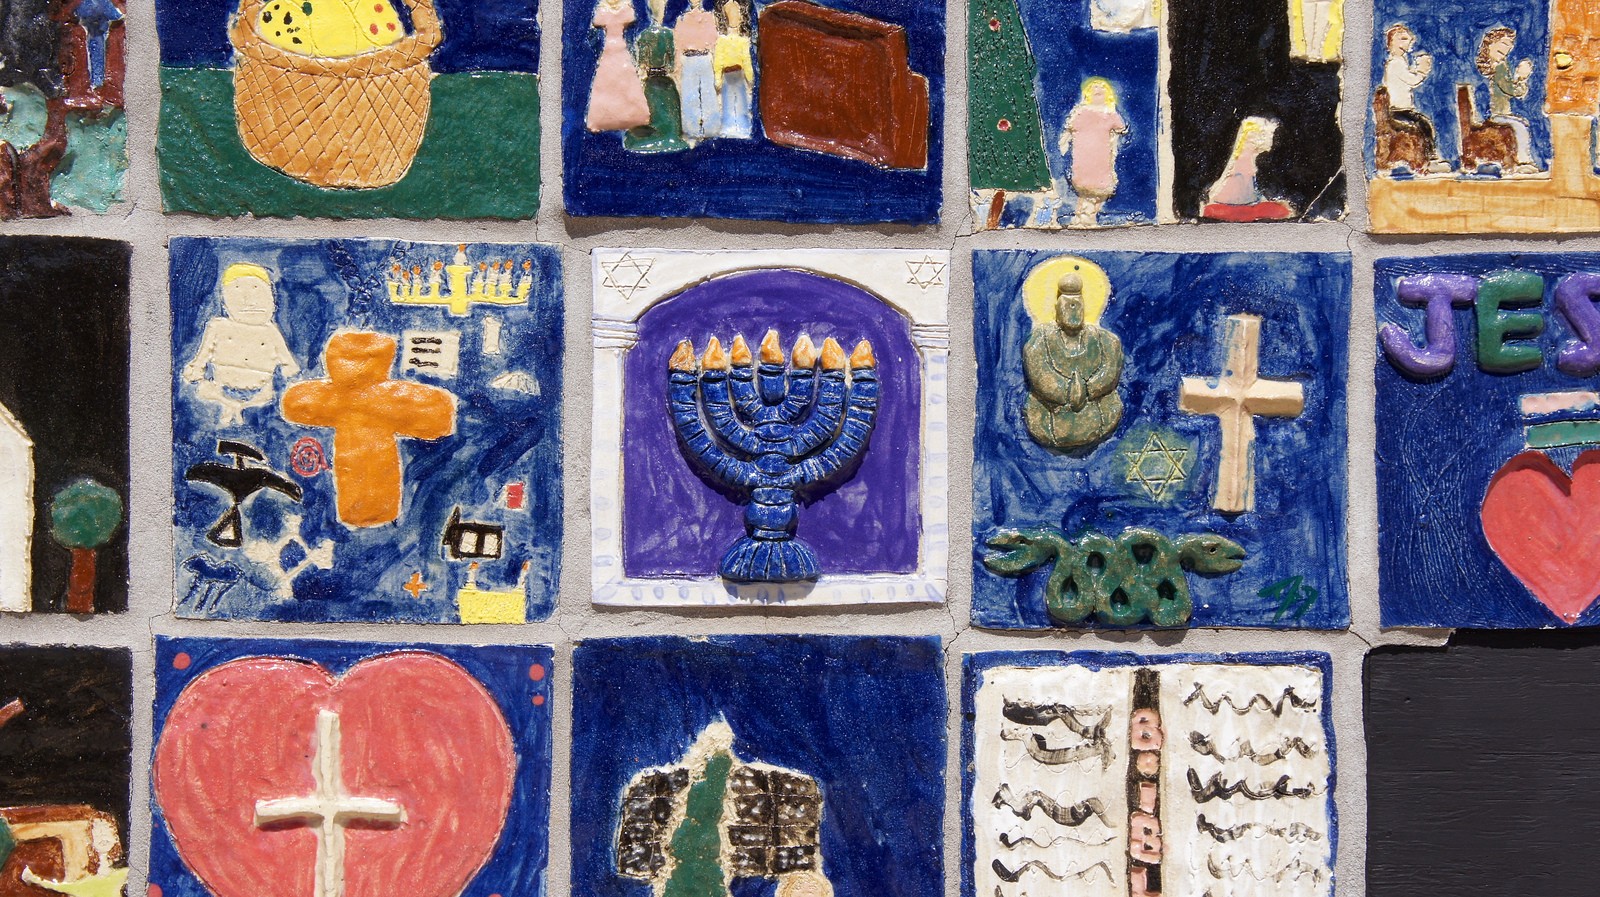 Primitive images of various religious symbols |  tedeytan  -  Foter  -  CC BY-SA 2.0